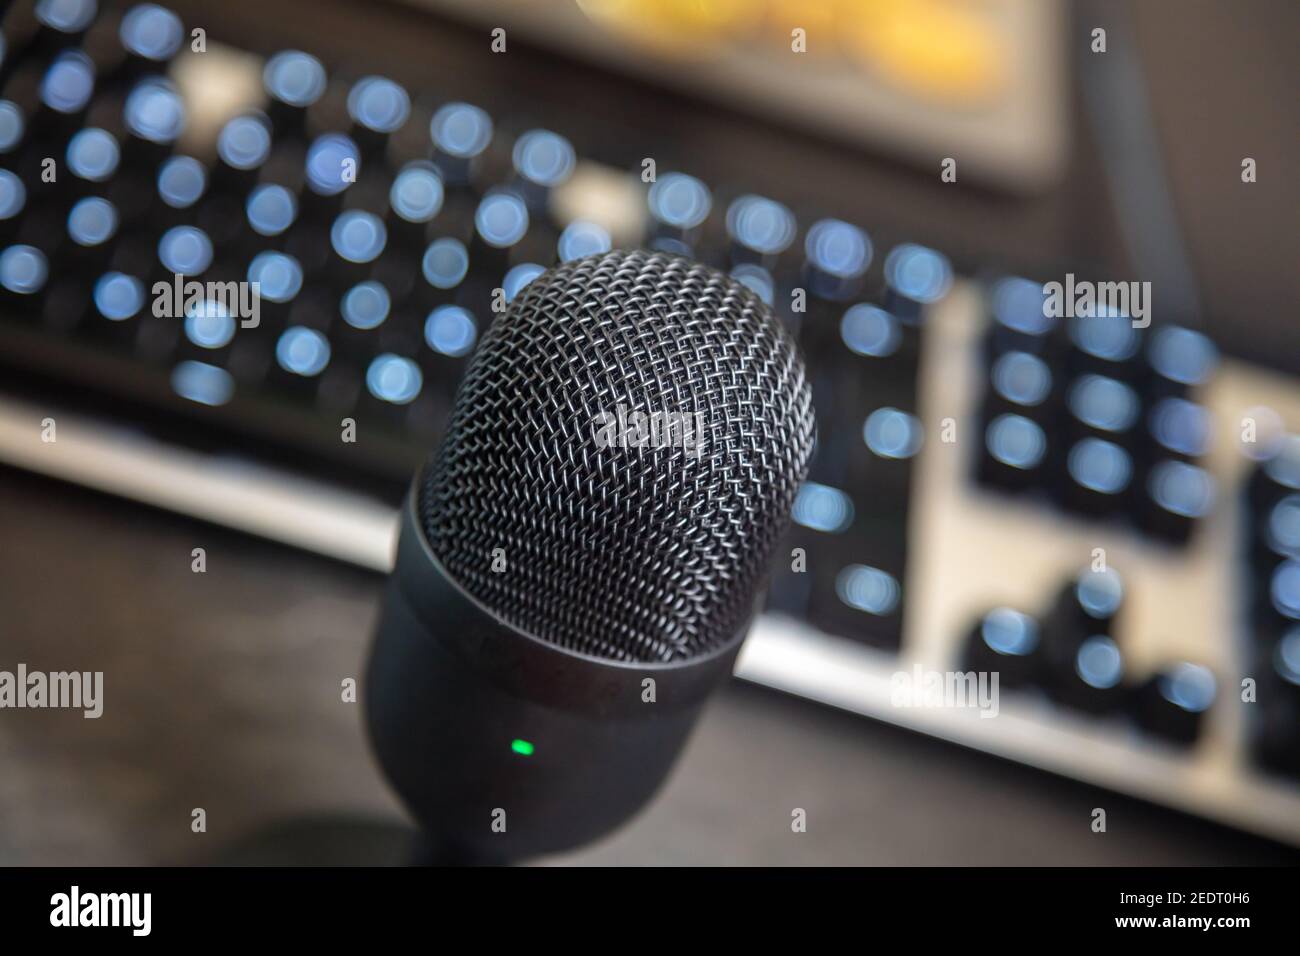 Tilted mic condenser black metallic, blur keyboard and monitor background. Digital technology concept. Communication with pc through mike, recording, Stock Photo